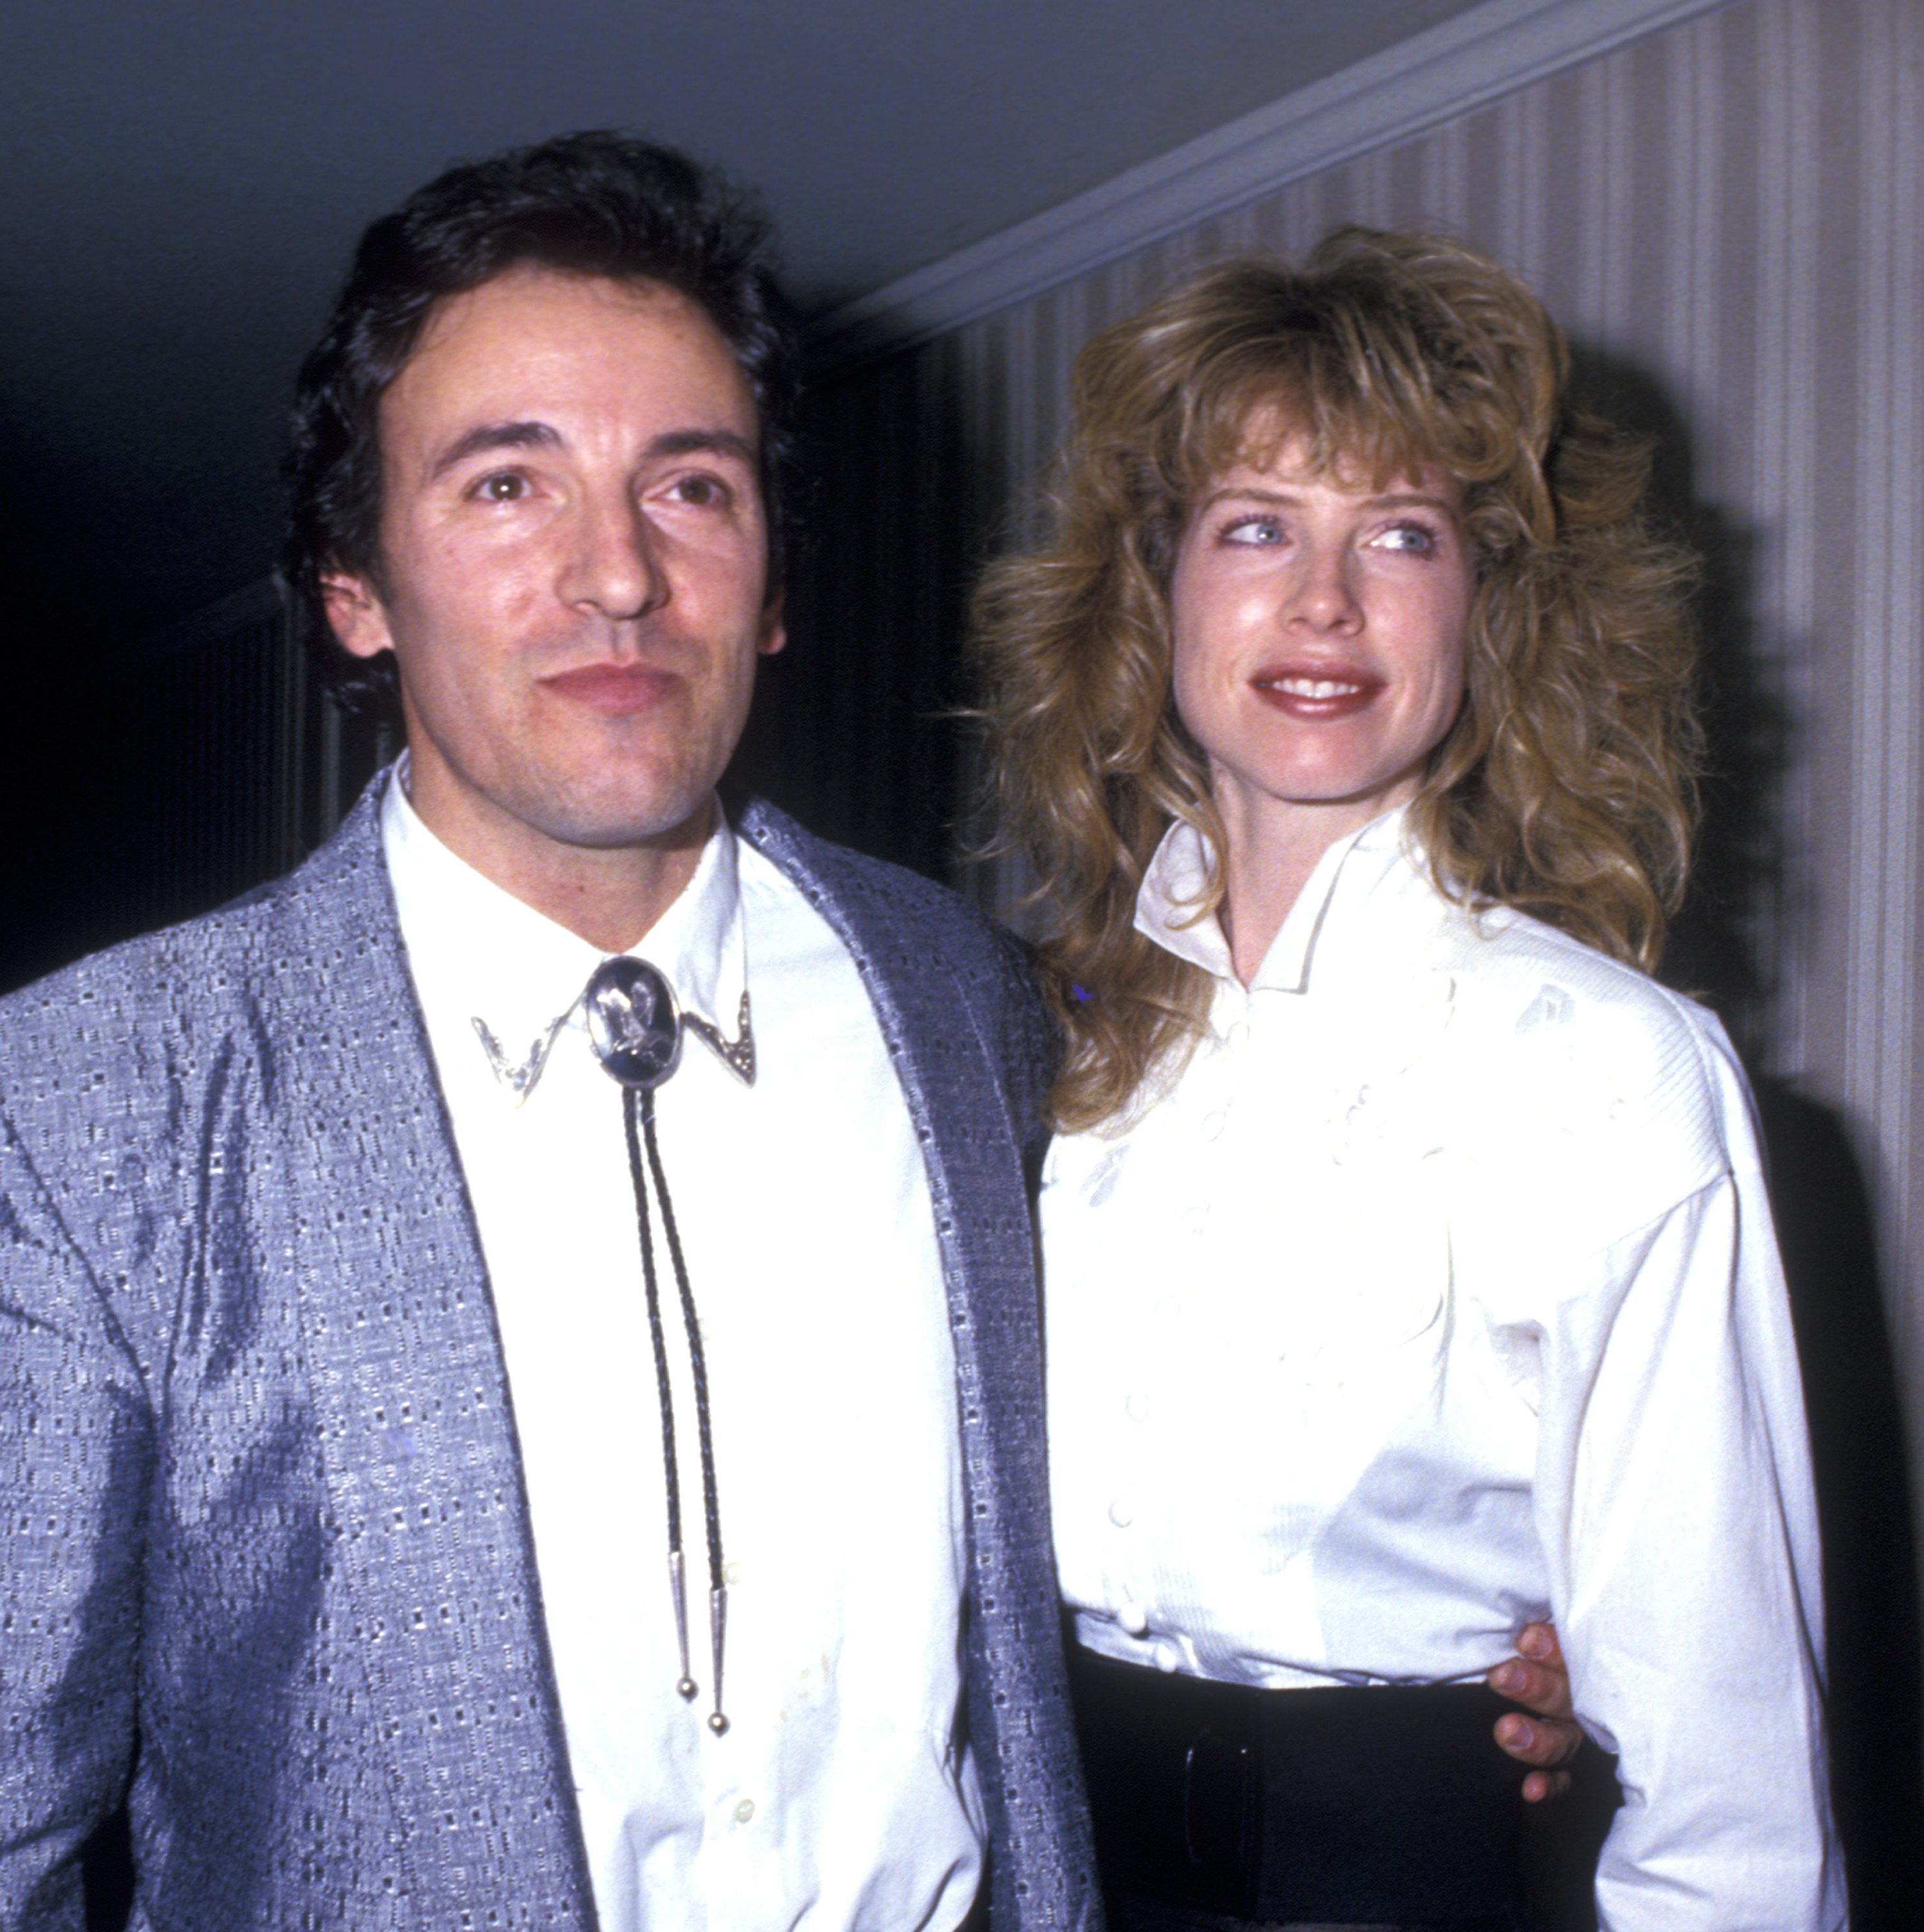 Bruce Springsteen and Julianne Phillips at the Third Annual Rock N Roll Hall of Fame Awards on January 20, 1988. | Source: Getty Images